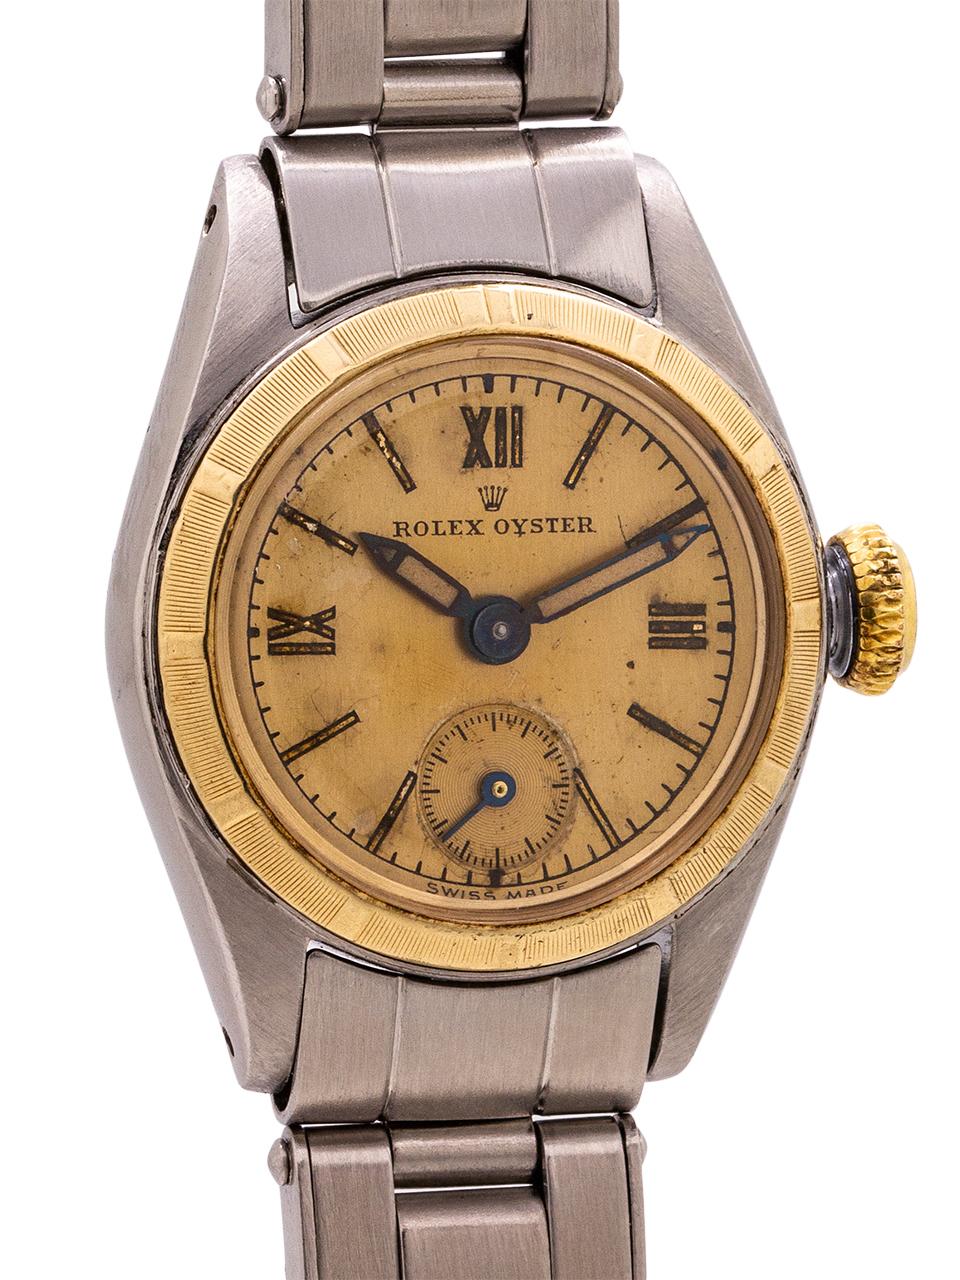 
Lady Rolex Oyster manual wind stainless steel and 14K ref 4437 circa 1958. Featuring a 27mm diameter Oyster case with yellow gold fluted bezel and screw down case back and original yellow gold period screw down crown. With very pleasing original